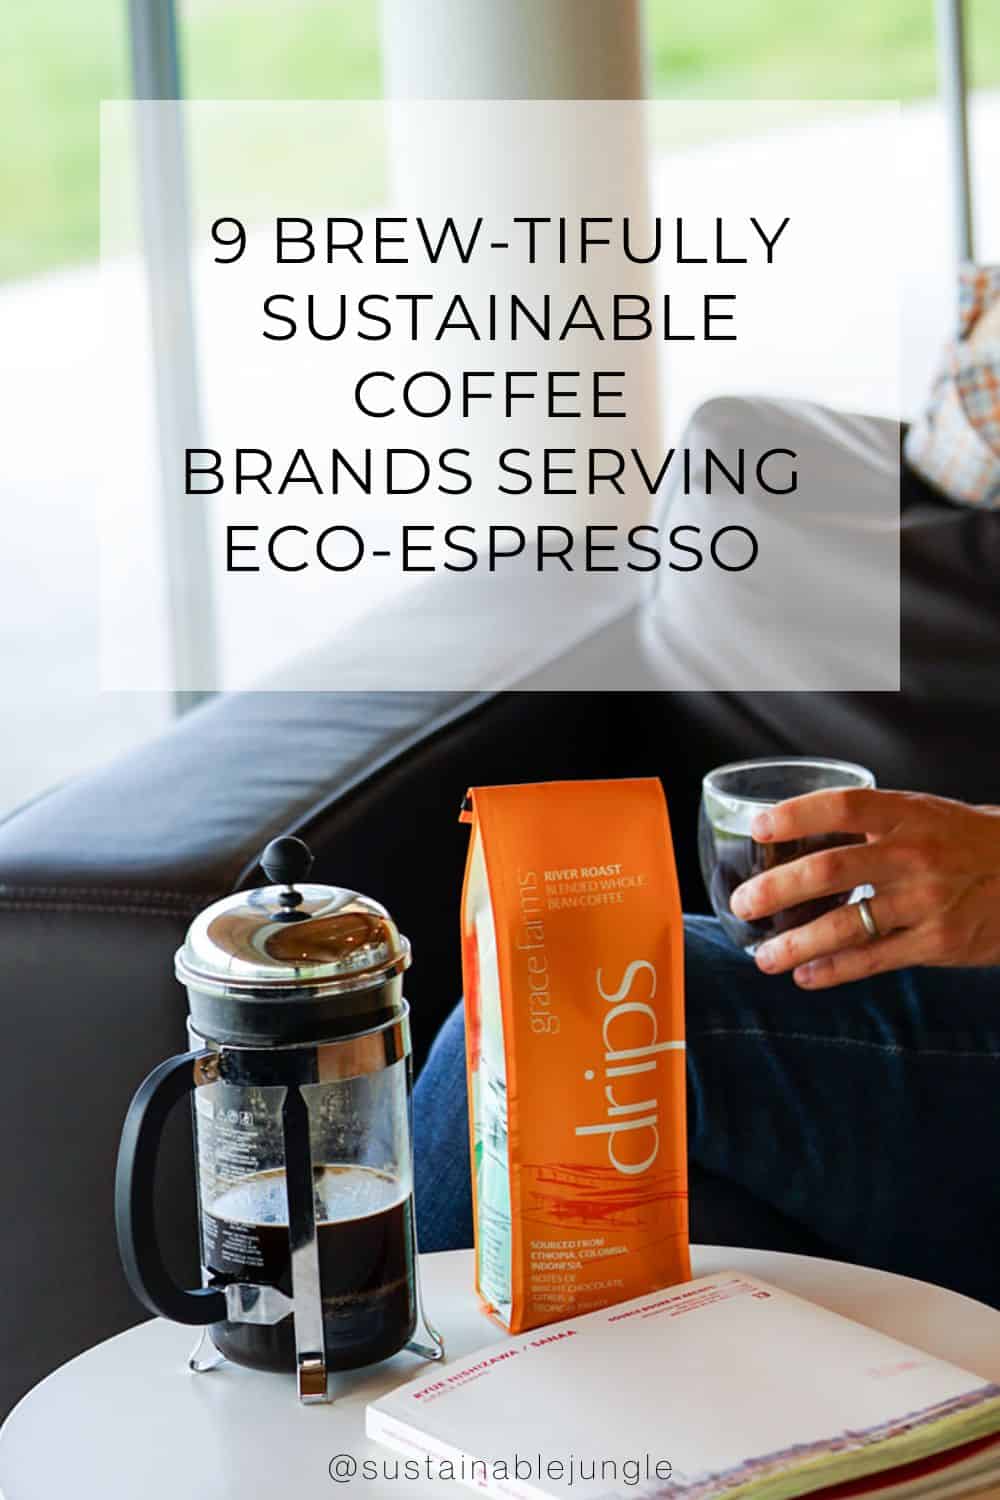 9 Brew-Tifully Sustainable Coffee Brands Serving Eco-Espresso Image by Grace Farms #sustainablecoffeebrands #sustaianblecoffeebeans #ethicalcoffeebrands #ecofriendlycoffee #ethicalcoffeecompanies #ethicalbeancoffee #sustainablejungle